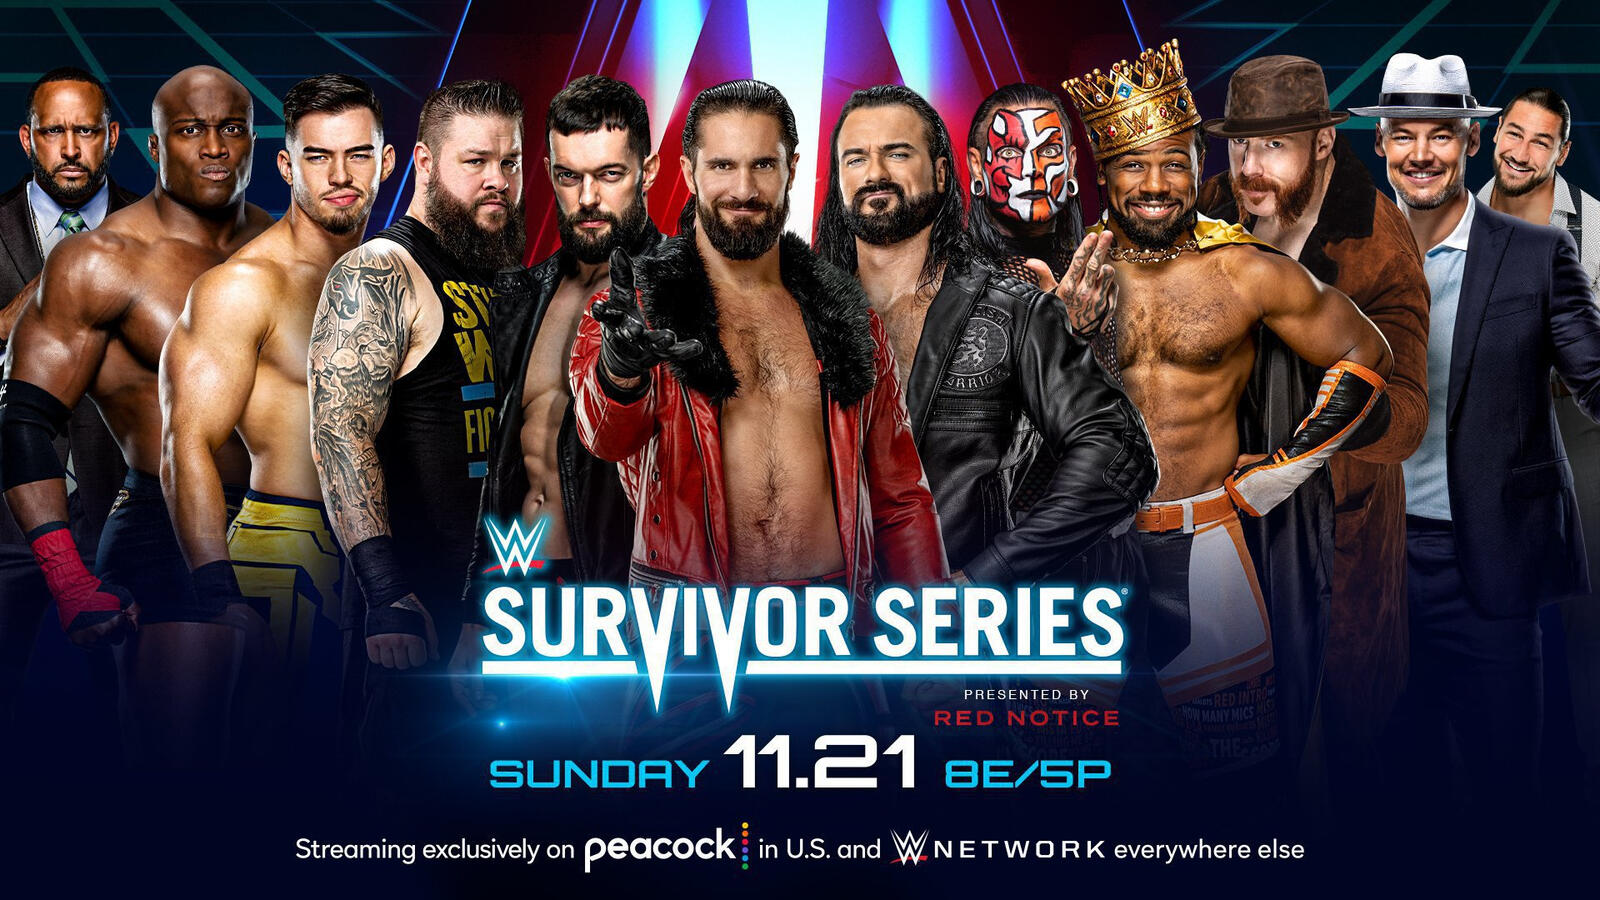 Sheamus Is The Final Member Of Team SmackDown At WWE Survivor Series